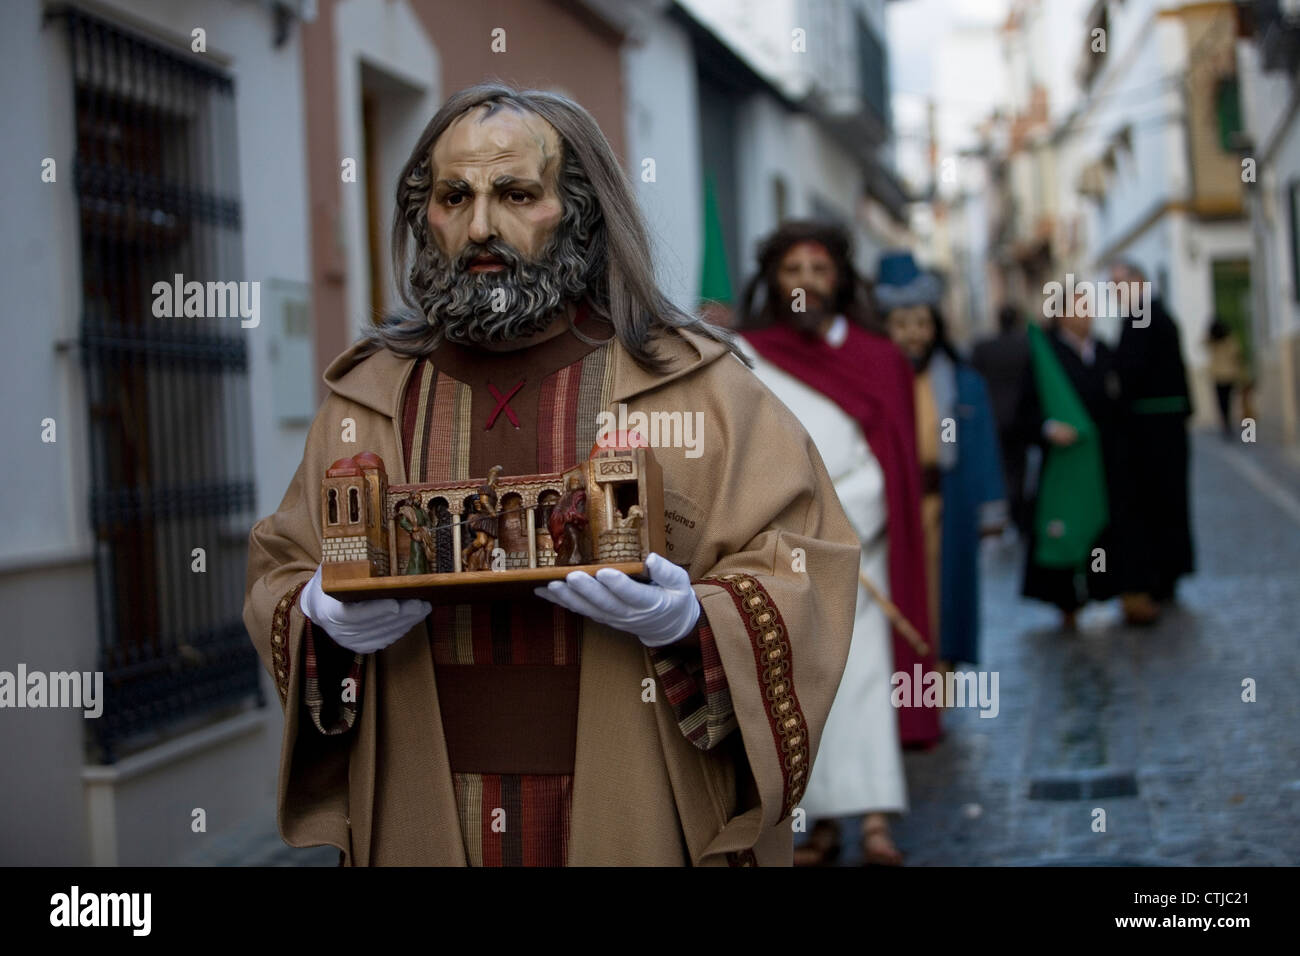 Masked men dressed as biblical characters walk in a street during Easter Holy Week in Puente Genil, Cordoba, Andalusia, Spain Stock Photo